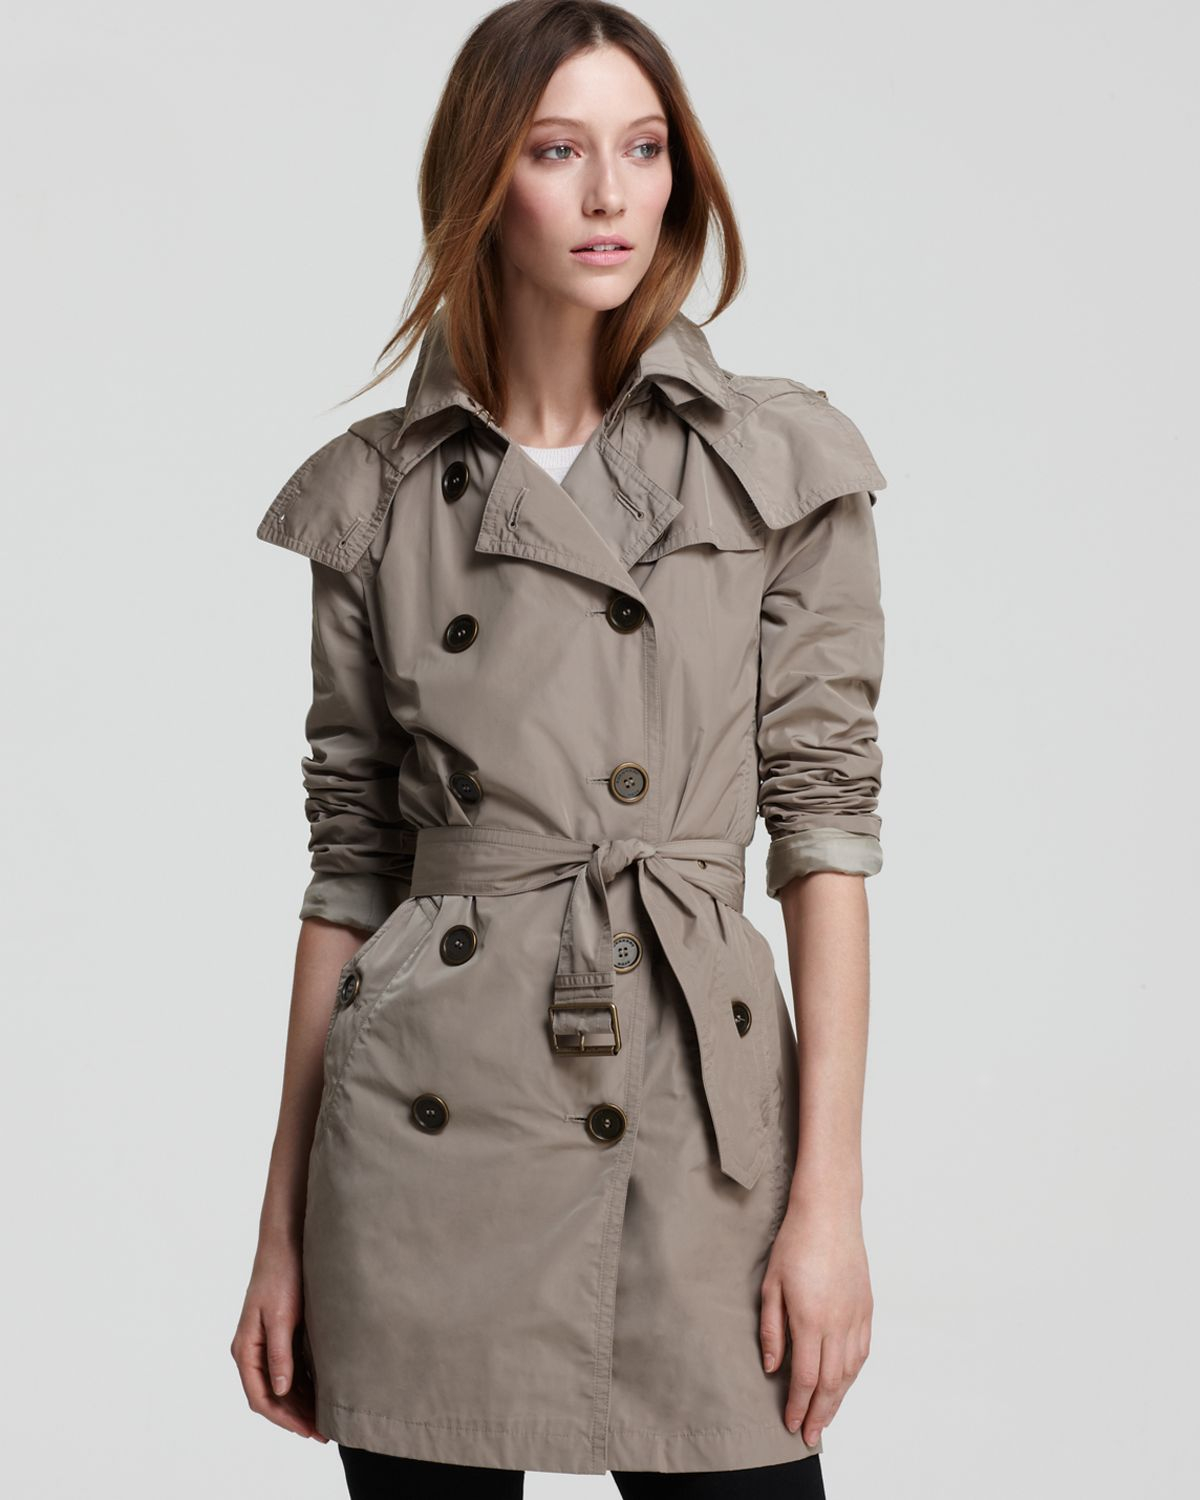 Lyst - Burberry Balmoral Raincoat with Hood in Natural